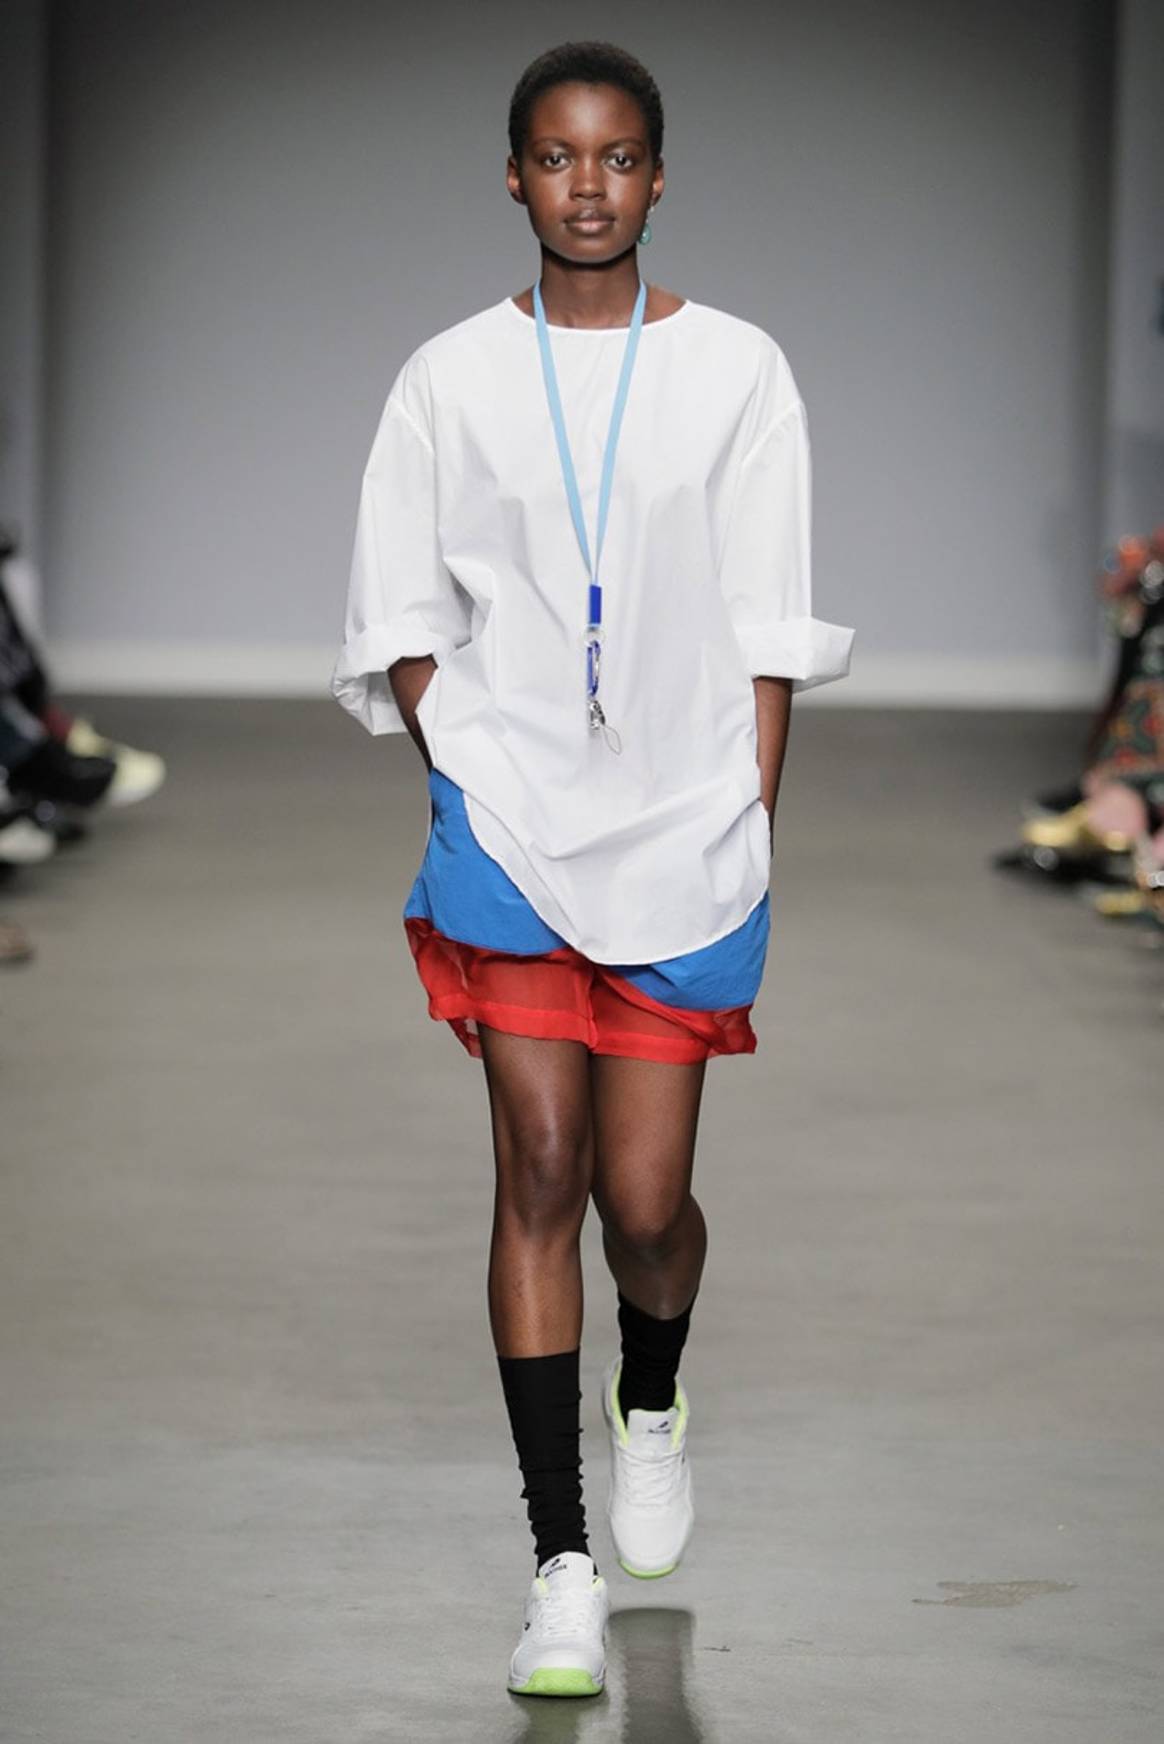 In Pictures: Sustainable Fashion in the spotlight at Amsterdam Fashion Week